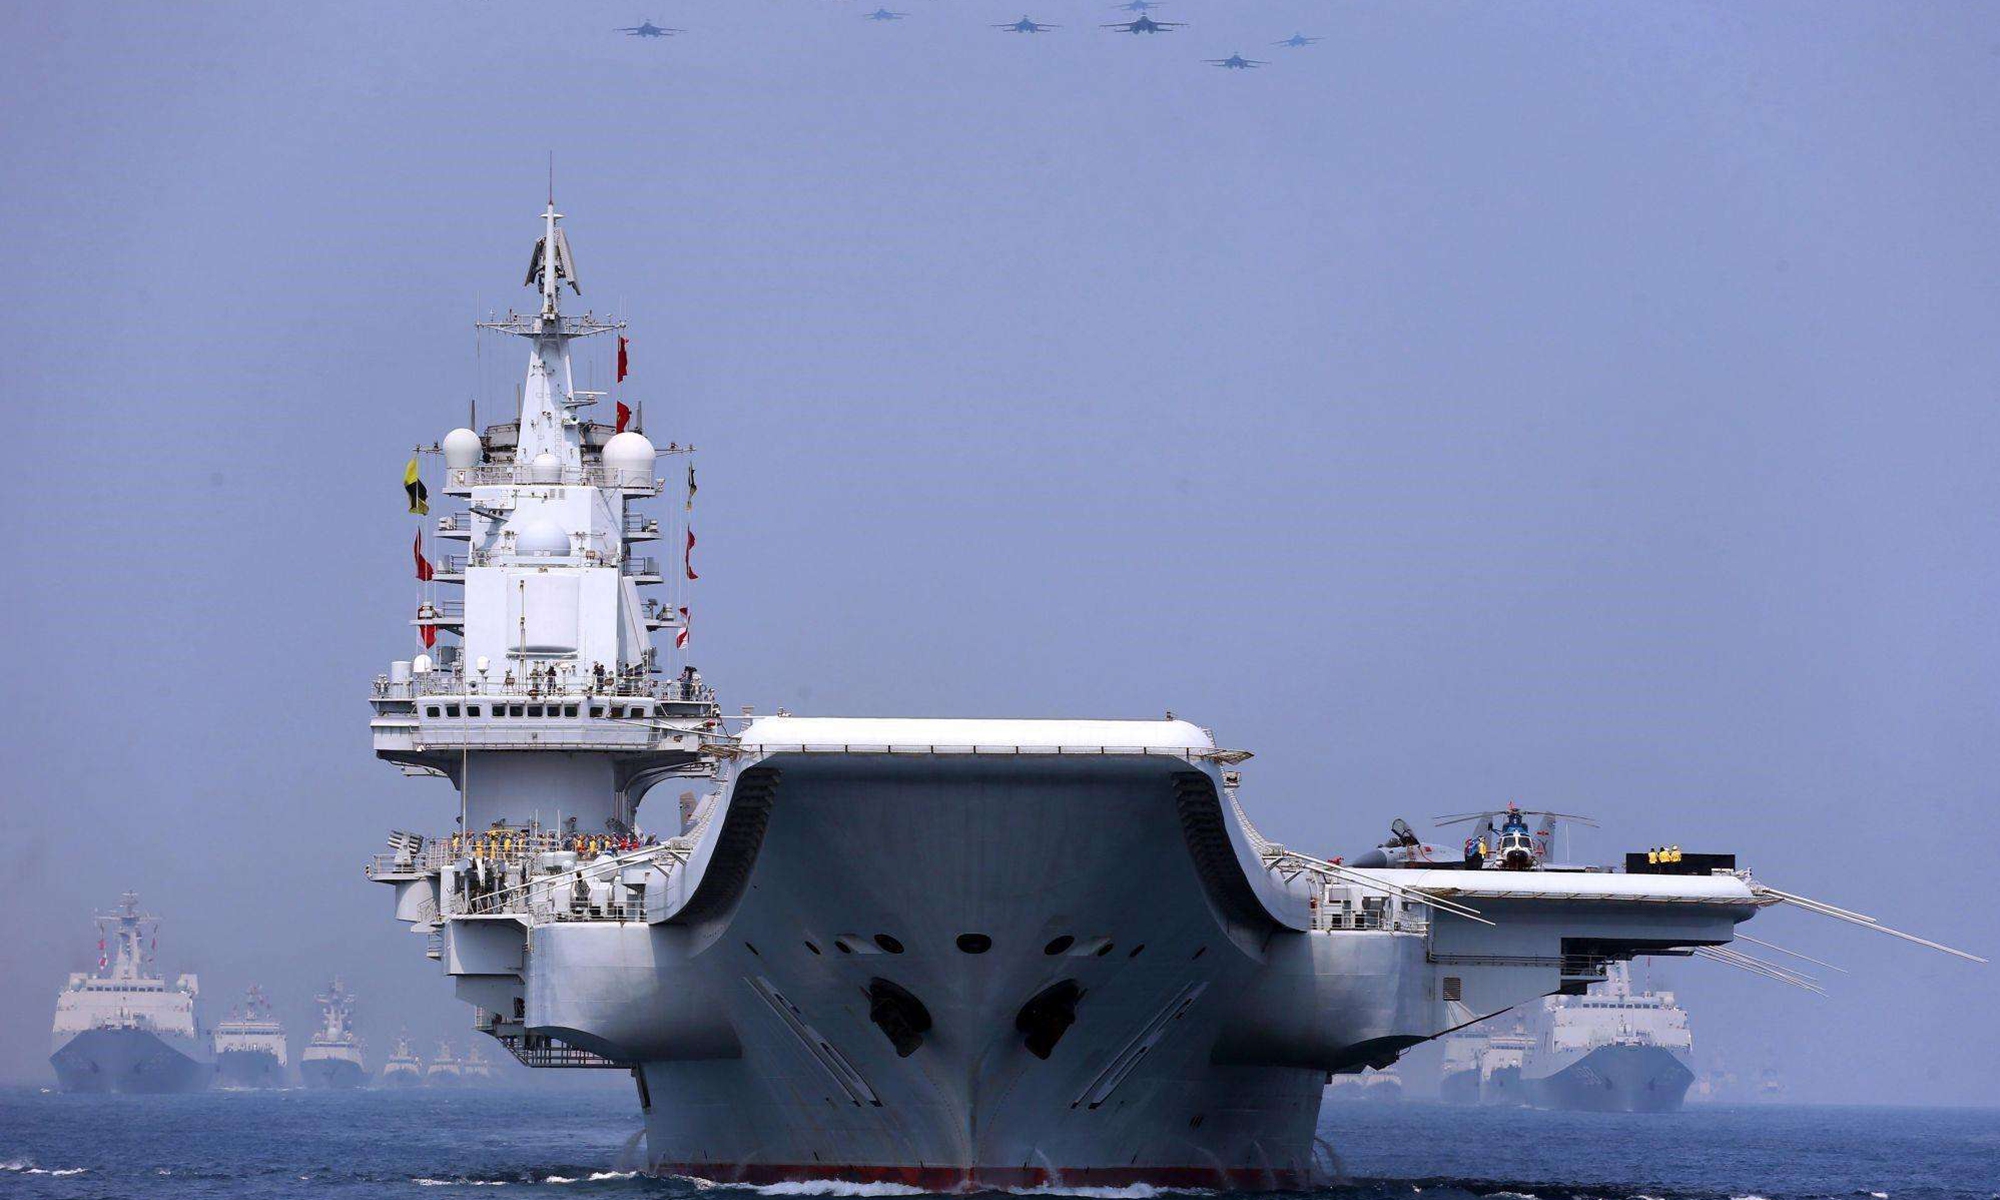 The picture shows the aircraft carrier <em>Liaoning</em> (Hull 16) and other vessels and fighter jets in the maritime parade conducted by the Chinese People's Liberation Army (PLA) Navy in the South China Sea on the morning of April 12, 2018.Photo:China Military